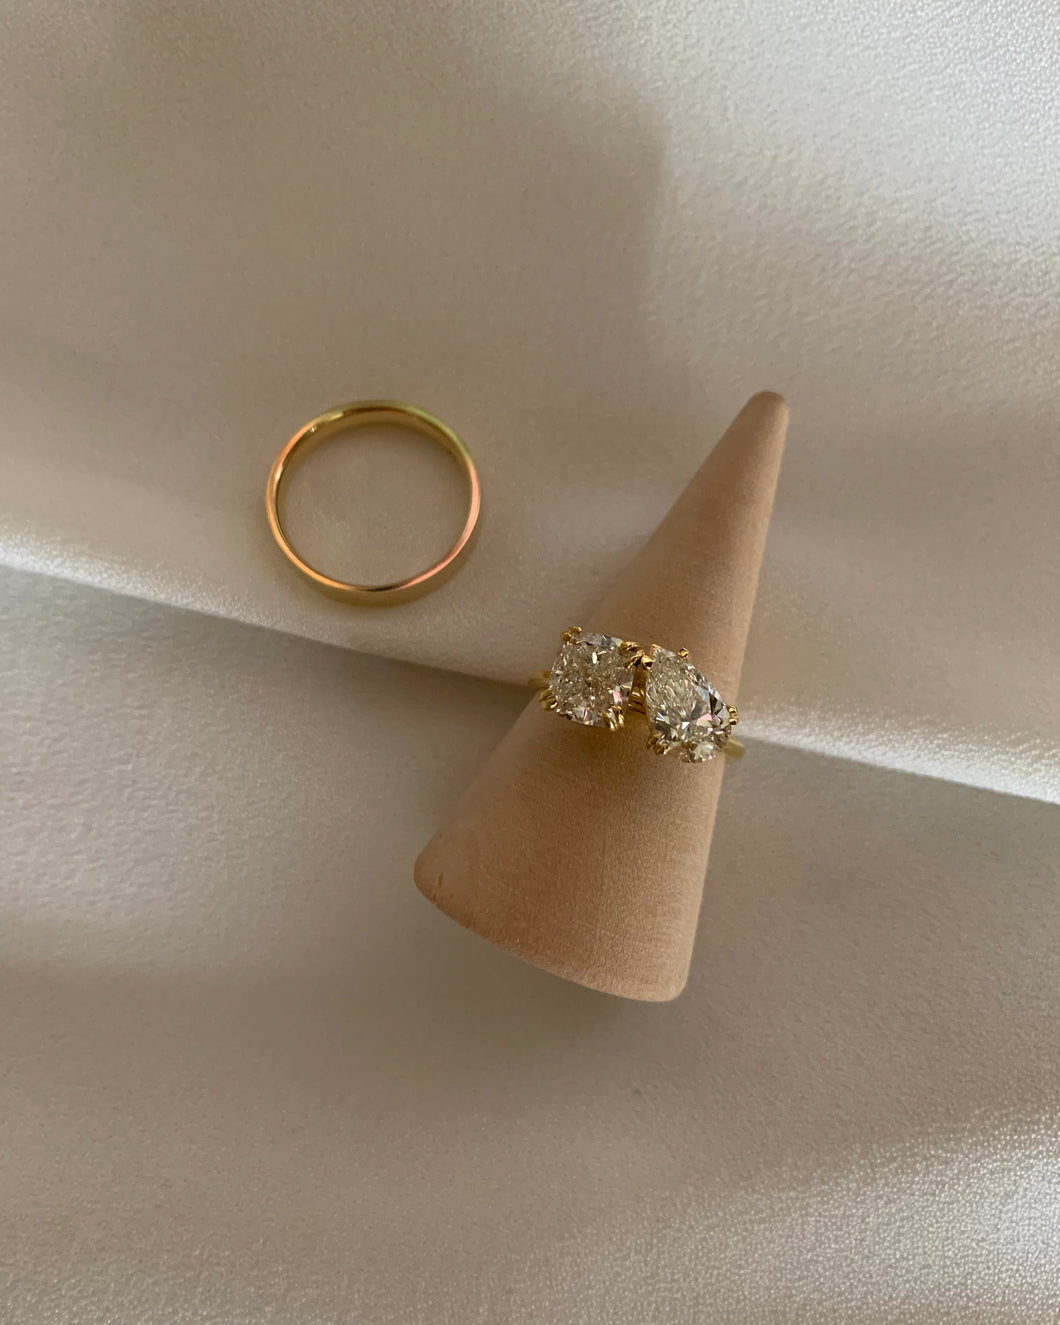 An 18k Gold engagement ring. Set with 1.02carat of round and pear-shaped diamonds met in the middle of the elegant and timeless design of gold band. 